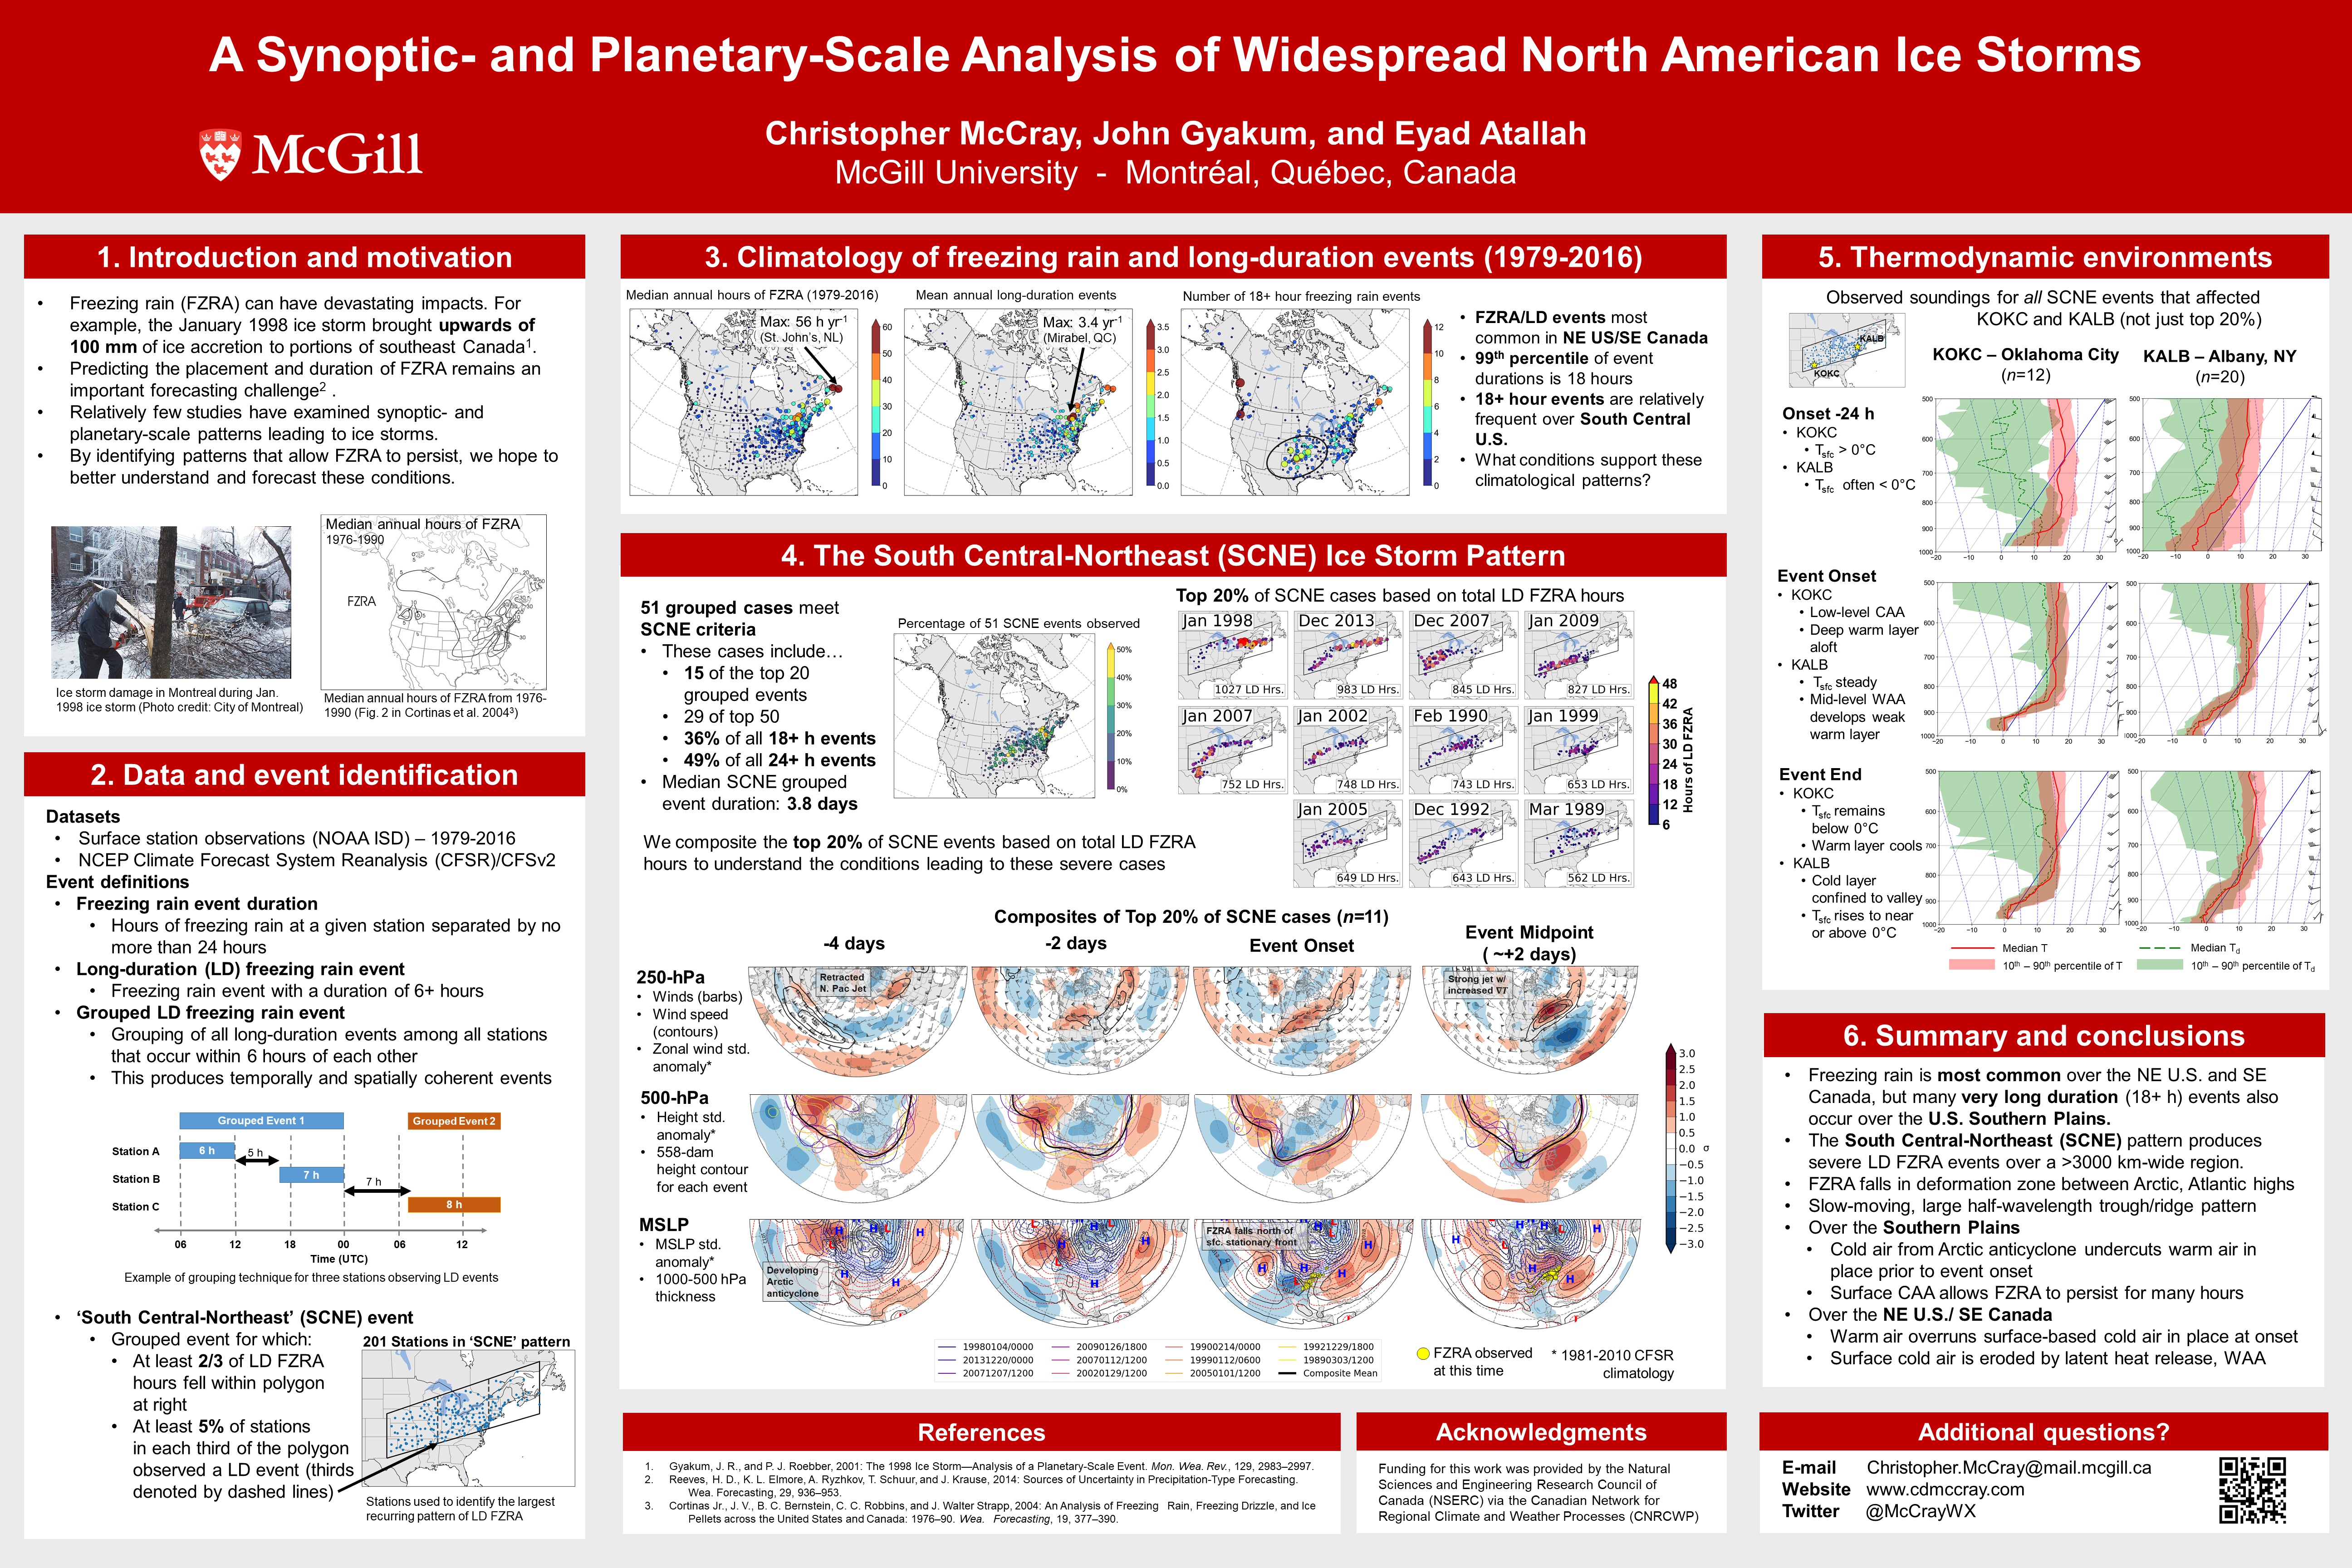 A Synoptic- and Planetary-Scale Analysis of Widespread North American Ice Storms